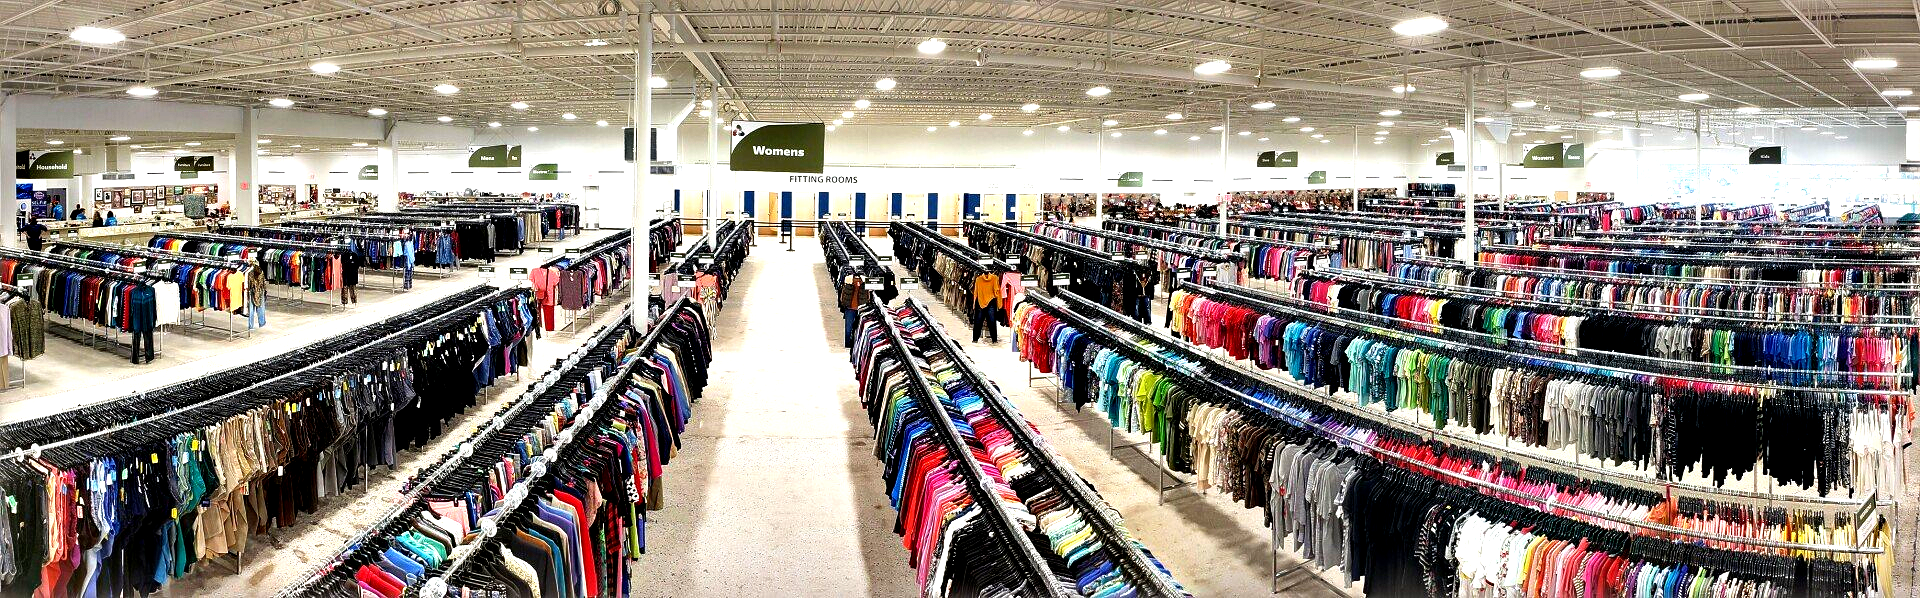 Worlds largest thrift store: Selinsgrove's Community Thrift Store & Donation Center sets world record